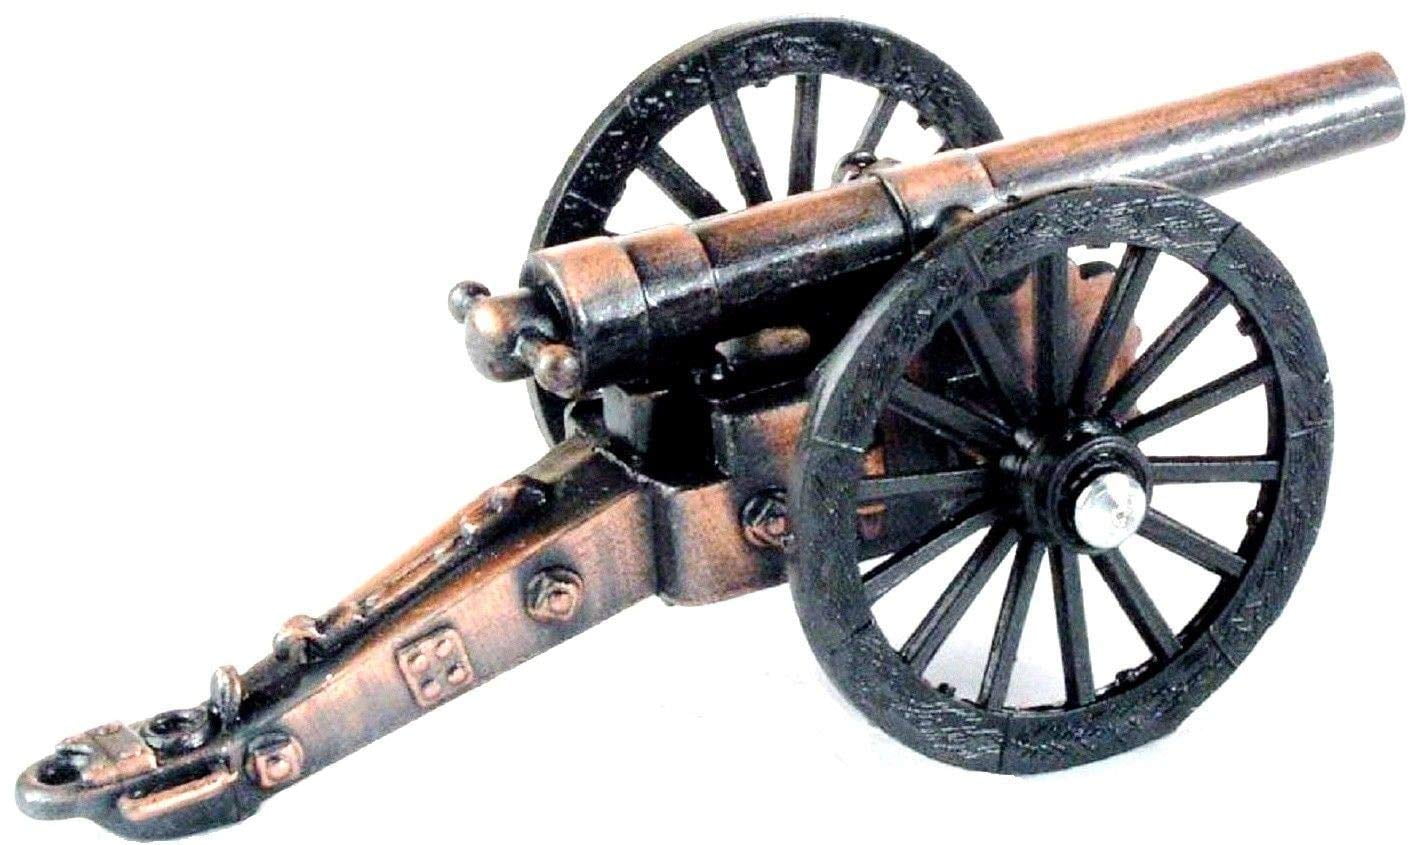 Army Howitzer Cannon Die Cast Metal Collectible Pencil Sharpener 